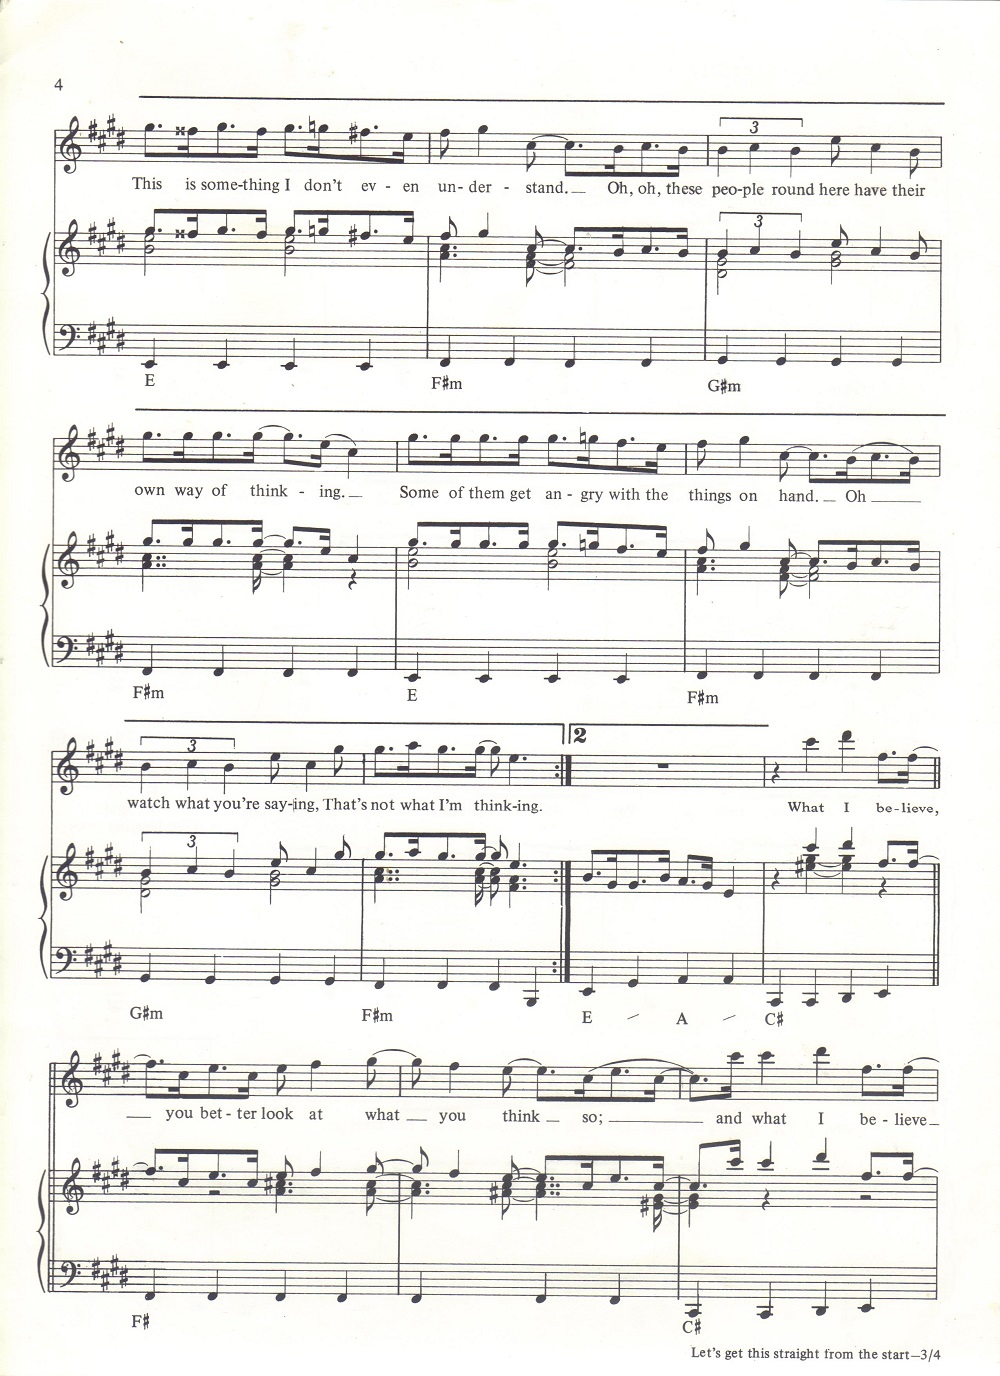 Lets_Get_This_Straight_Sheet_Music_4.jpg